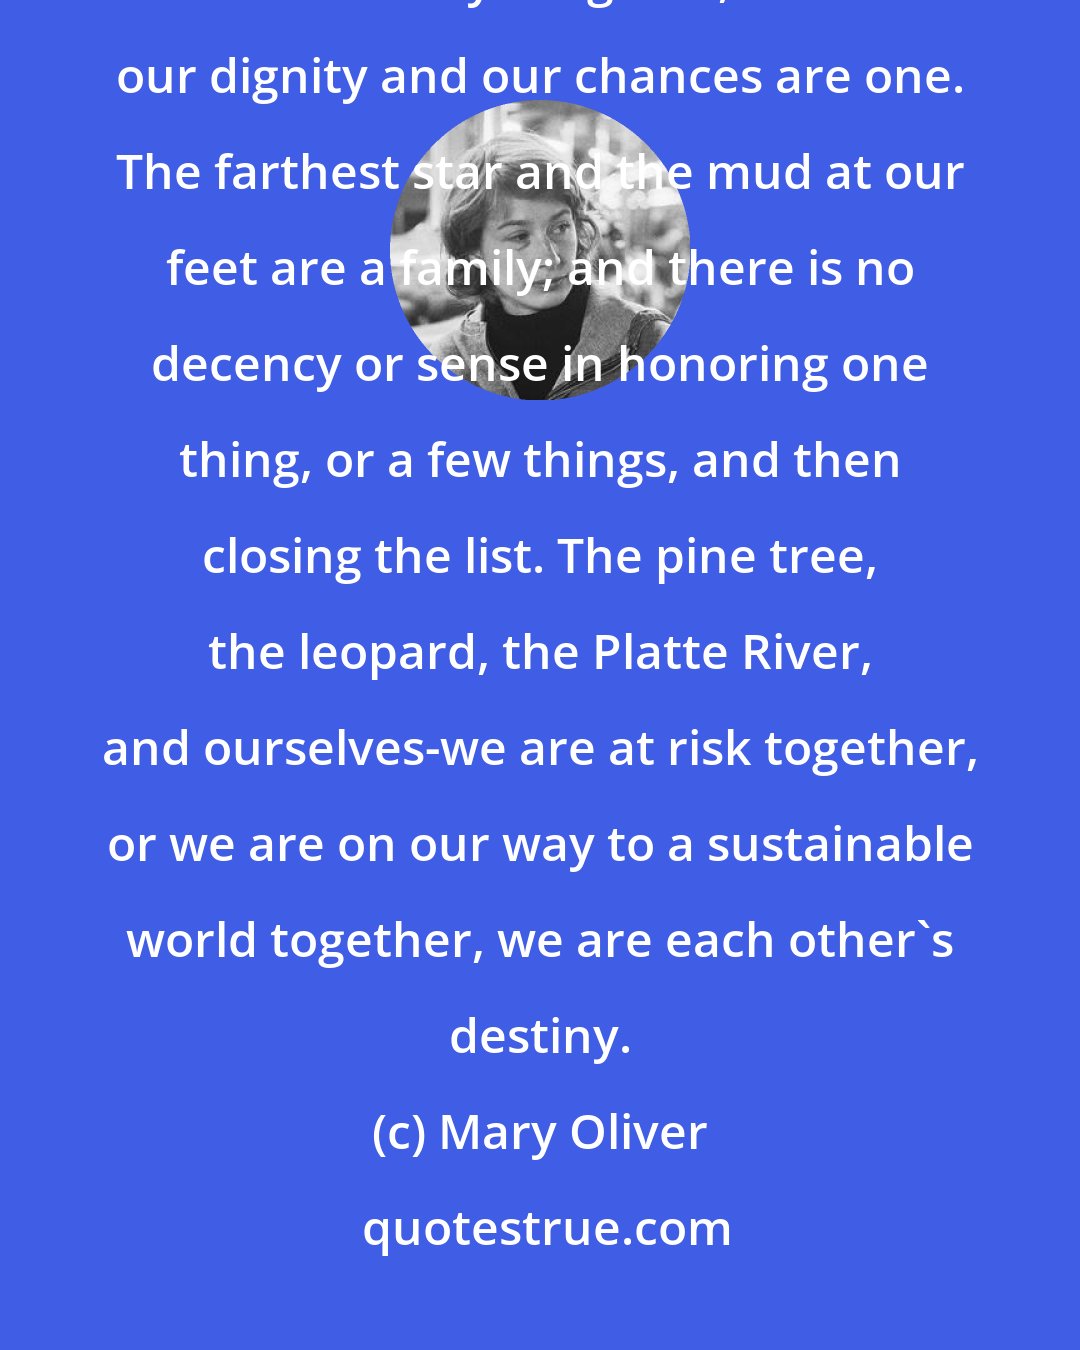 Mary Oliver: I would say that there exists a thousand unbreakable links between each of us and everything else, and that our dignity and our chances are one. The farthest star and the mud at our feet are a family; and there is no decency or sense in honoring one thing, or a few things, and then closing the list. The pine tree, the leopard, the Platte River, and ourselves-we are at risk together, or we are on our way to a sustainable world together, we are each other's destiny.